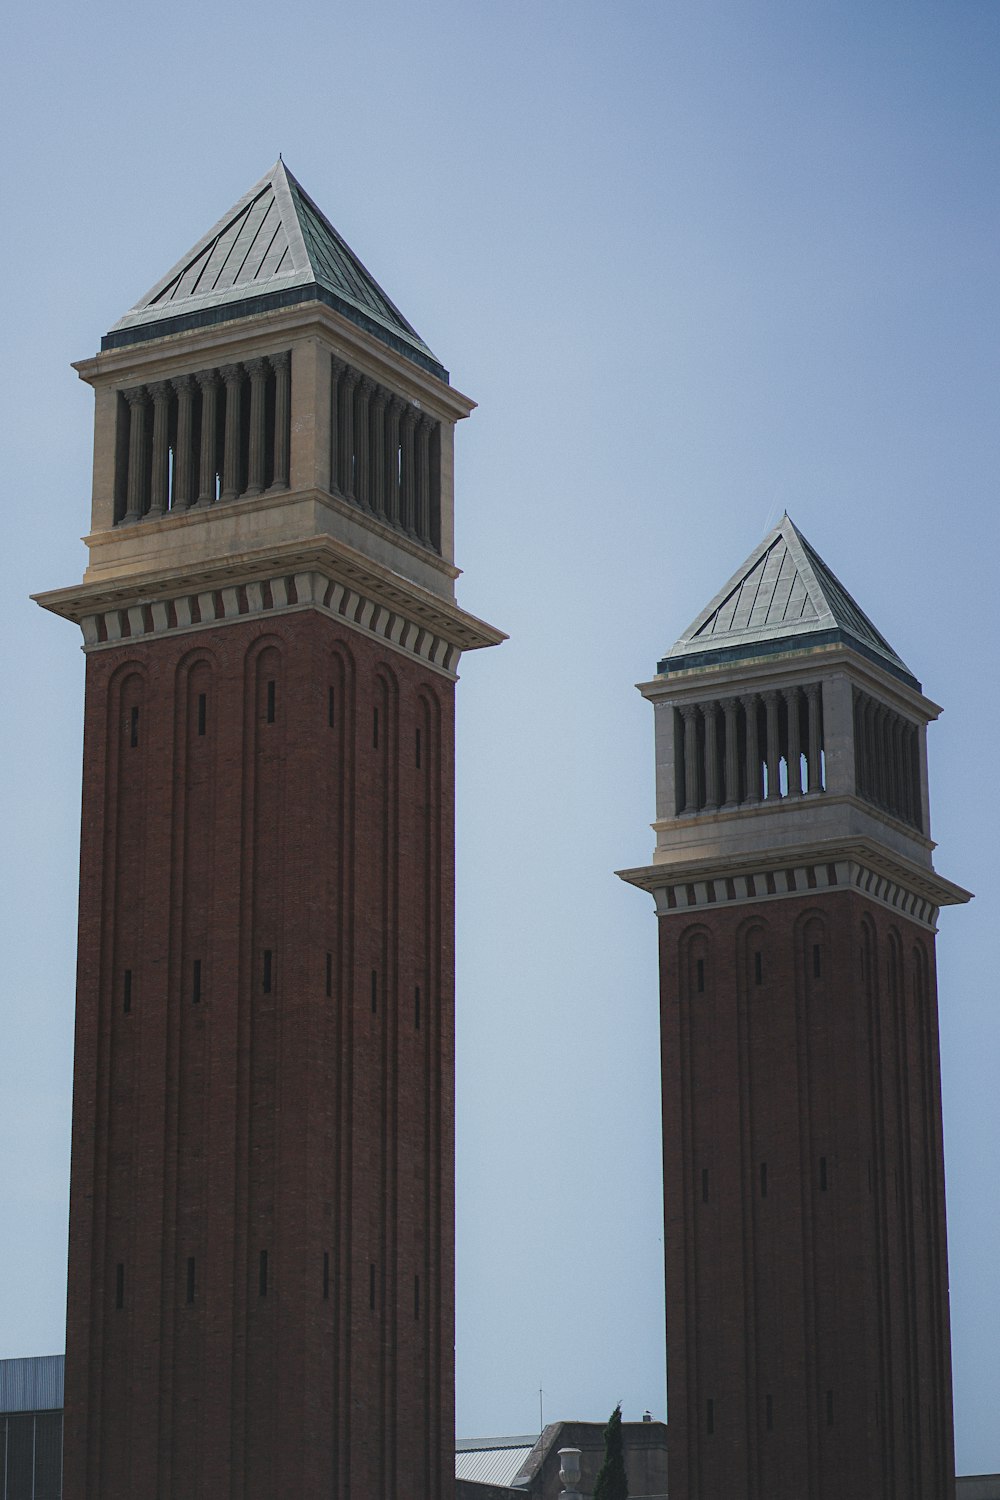 two tall brick towers with a clock on each of them